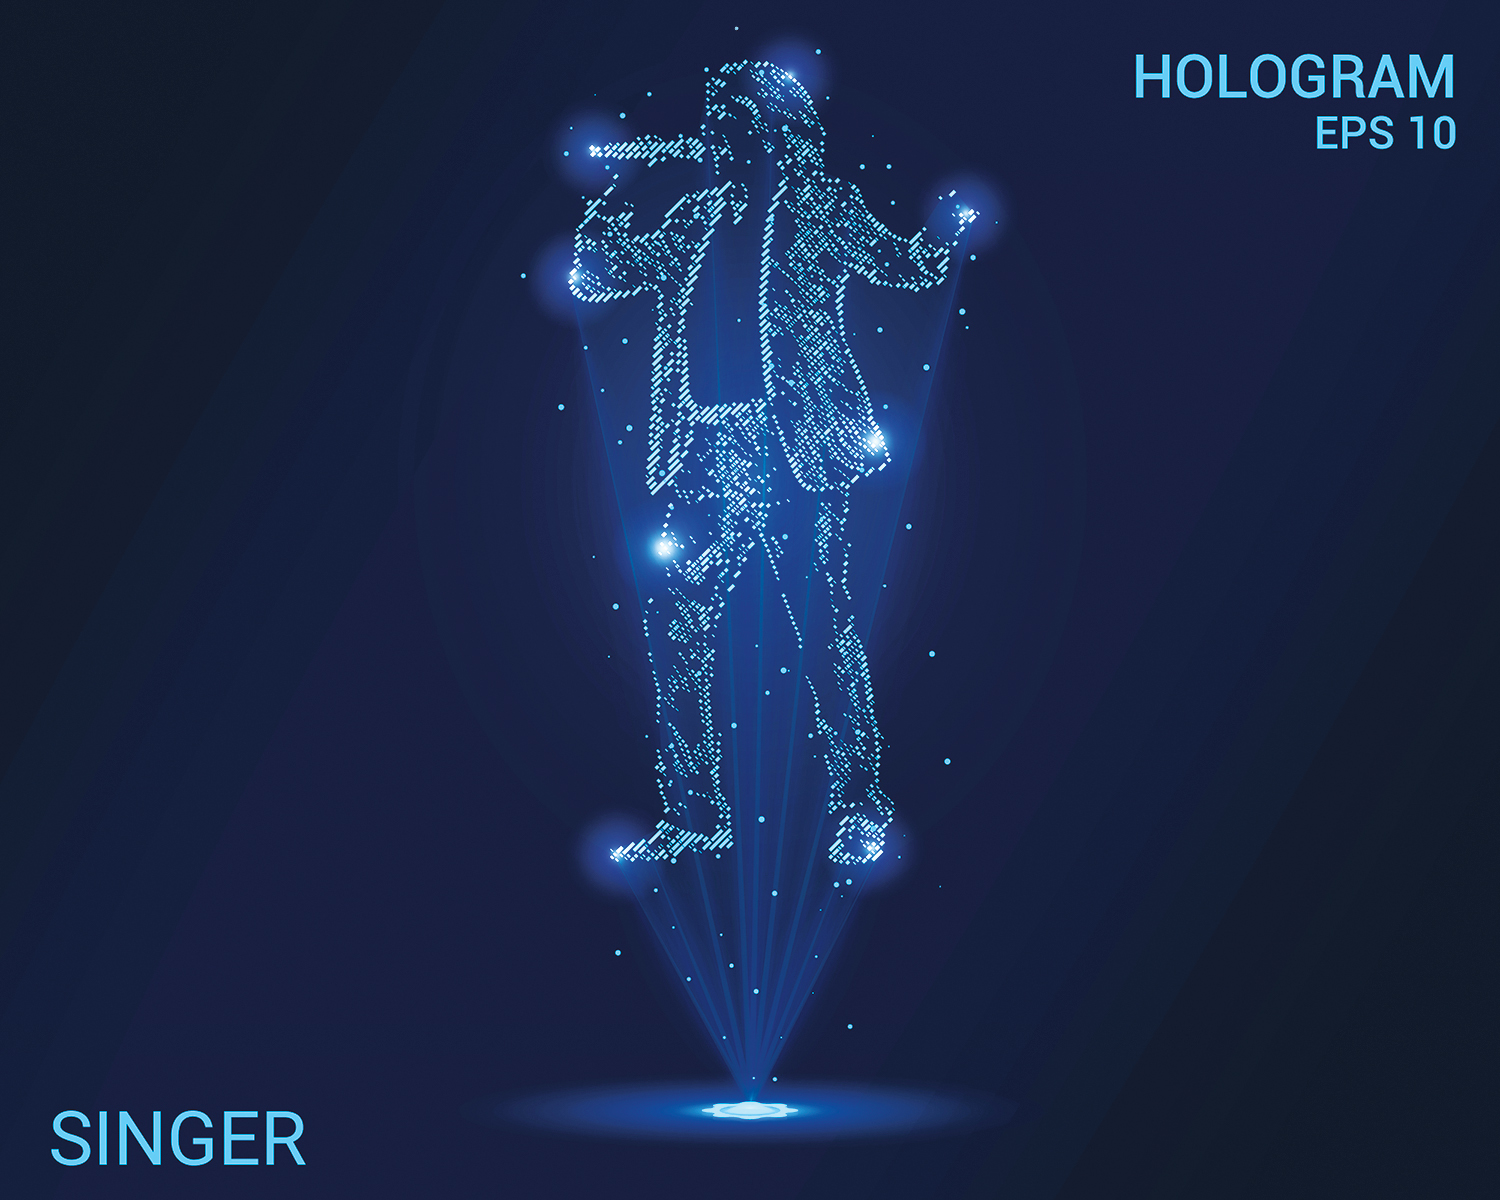 An illustration shows the hologram of a person singing with a mic. Hologram E P S 10 is indicated at top right and Singer is indicated at bottom left.
